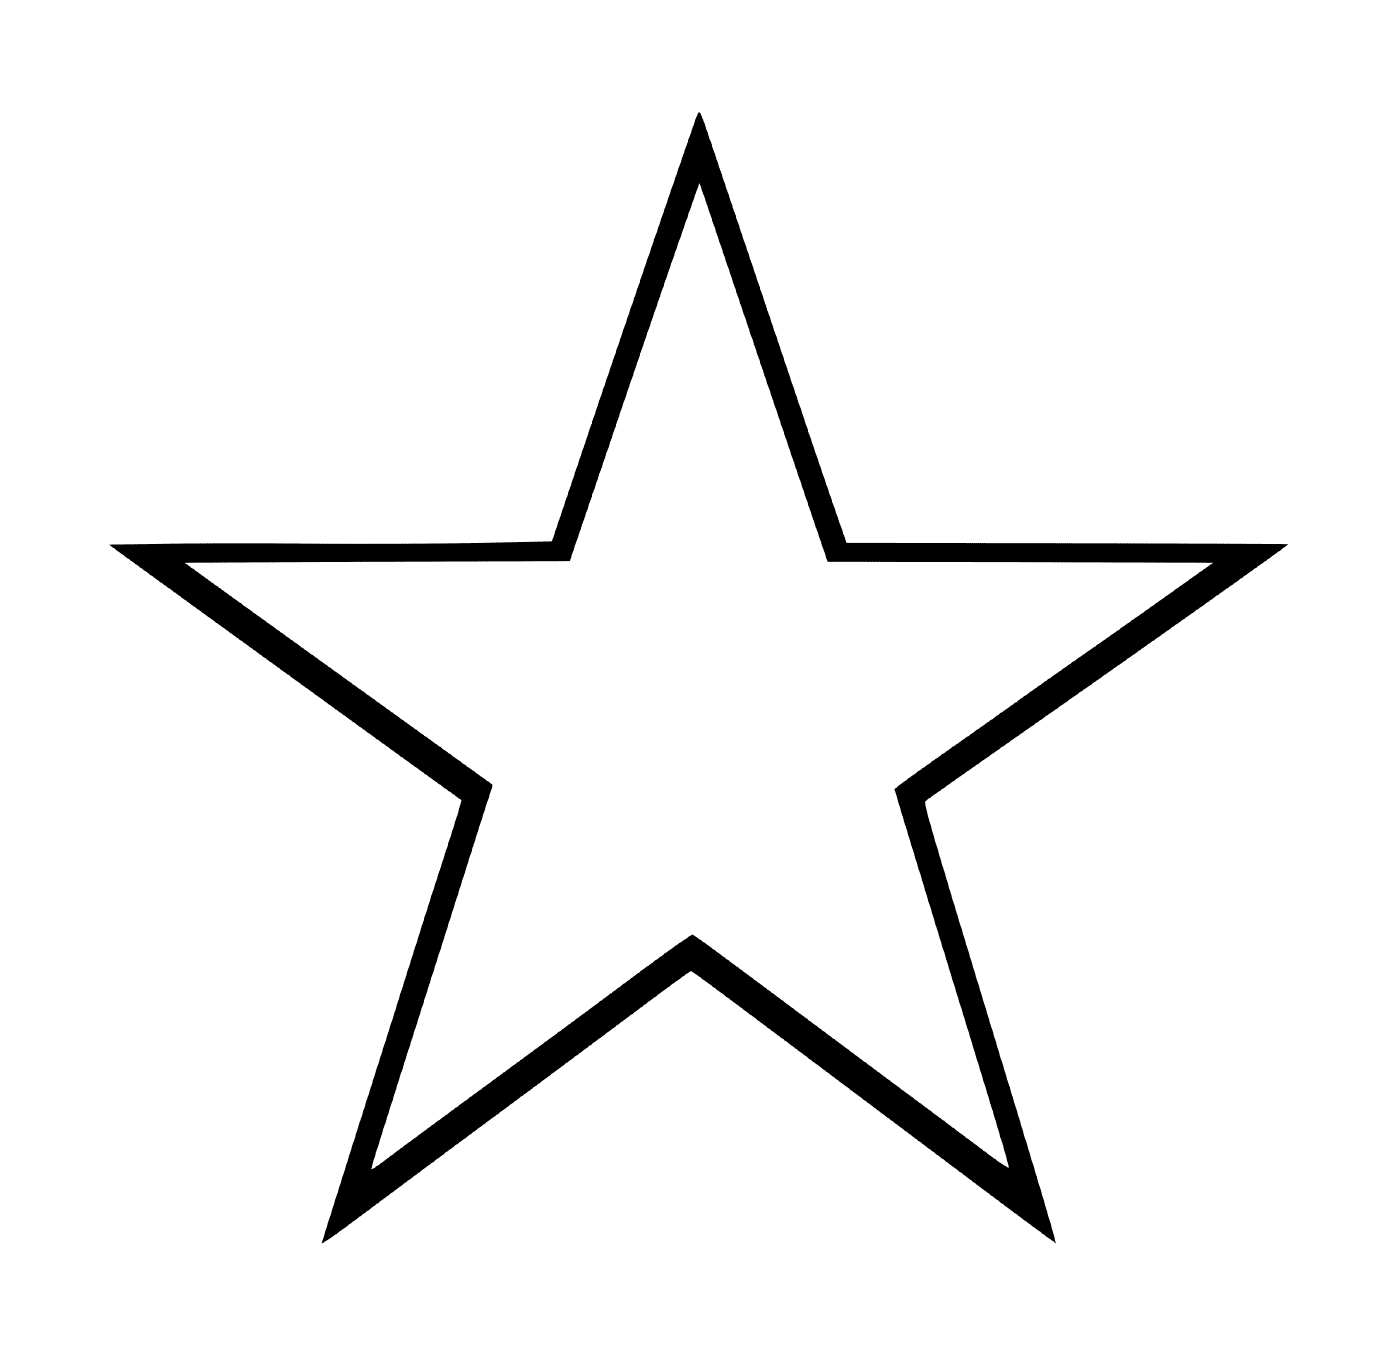  A star that's easy to draw 